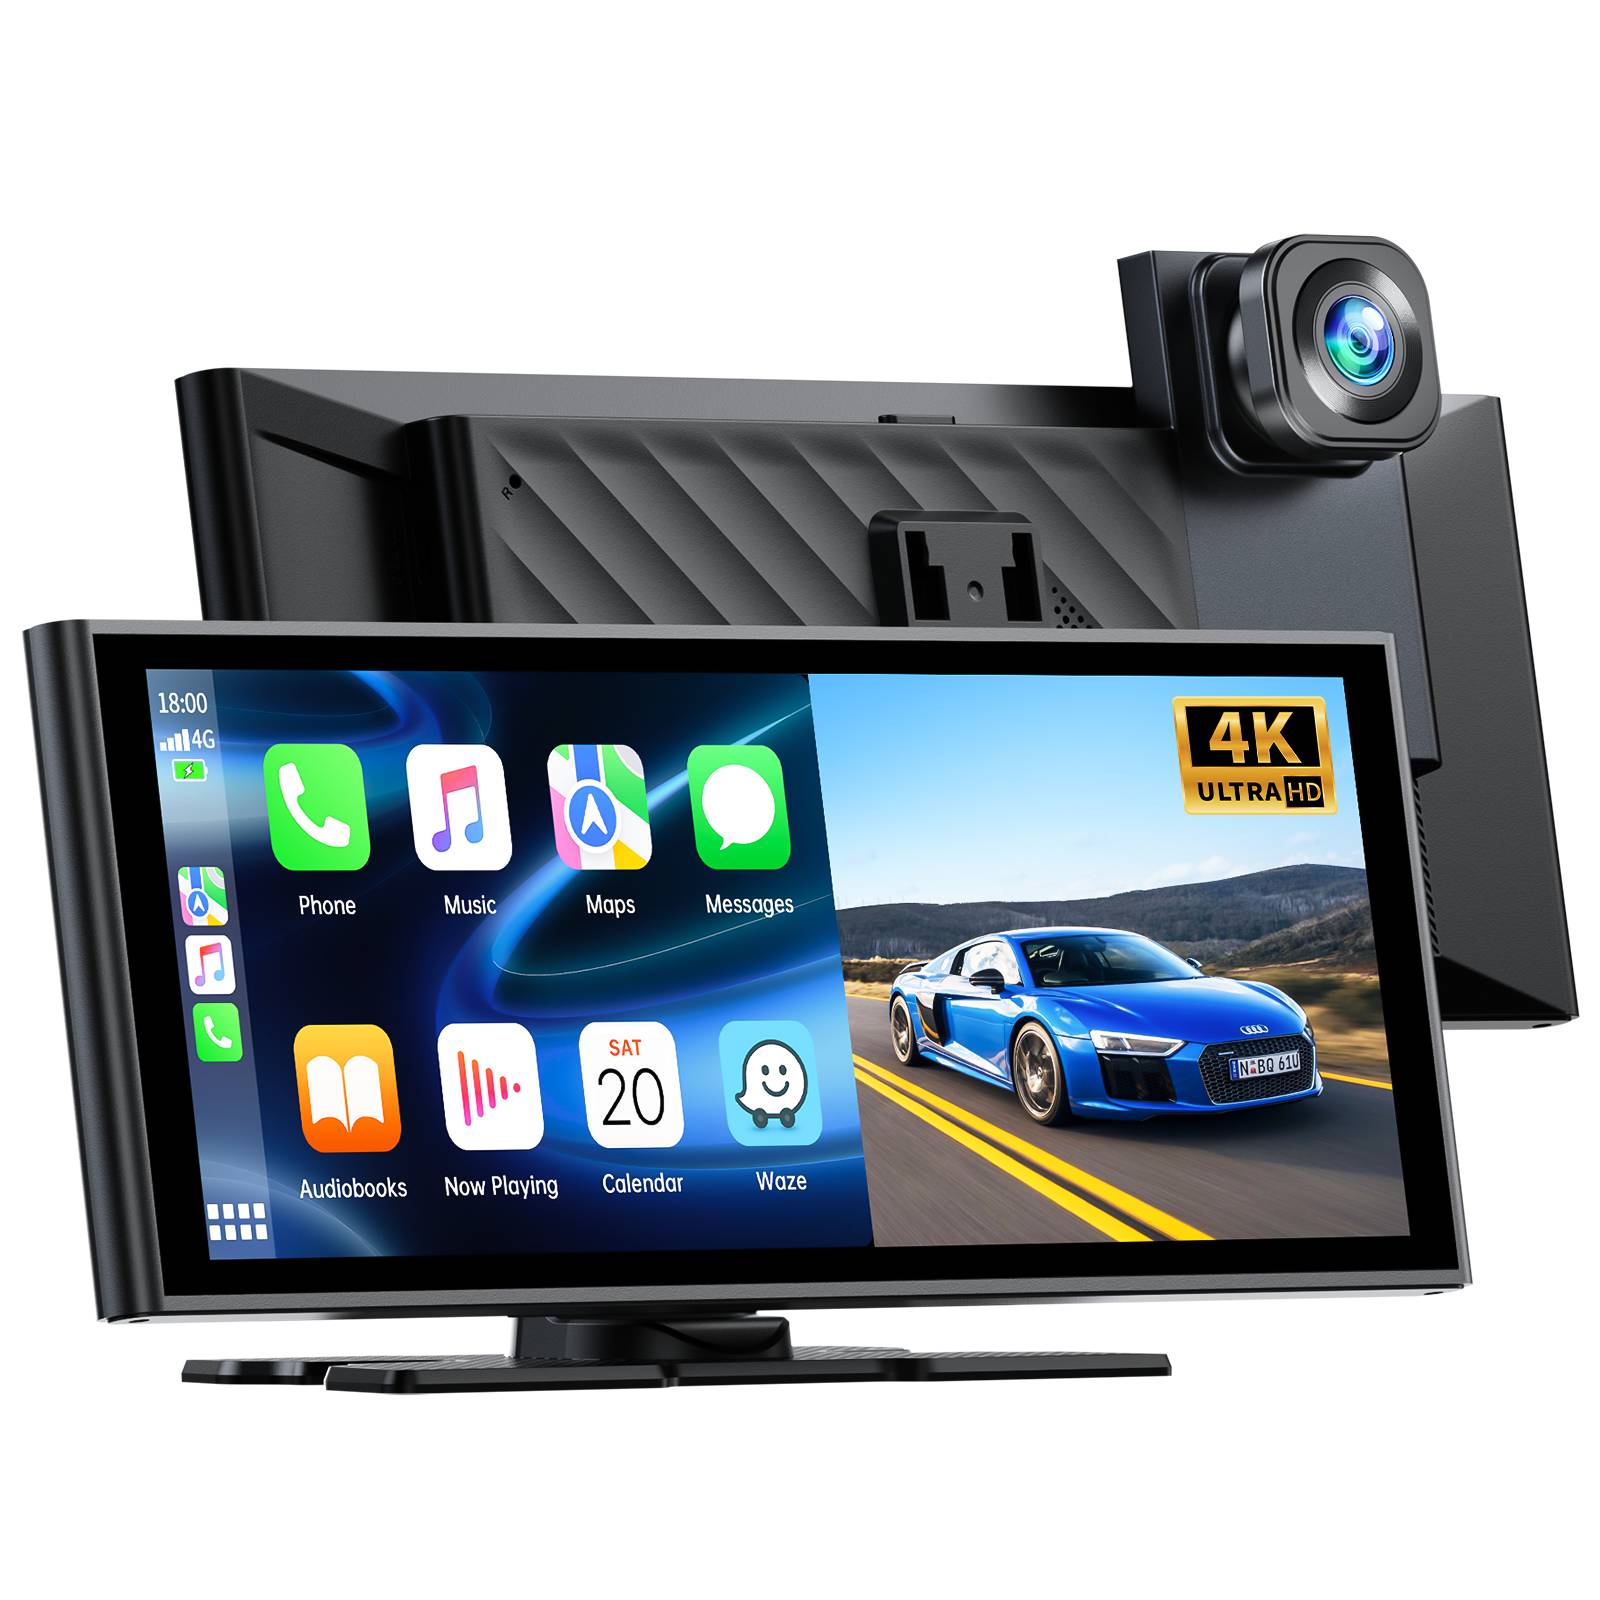 Lamtto RC14 9.26" Wireless Car Stereo Receiver Protable Carplay Screen for Car with 4K Dash Cam